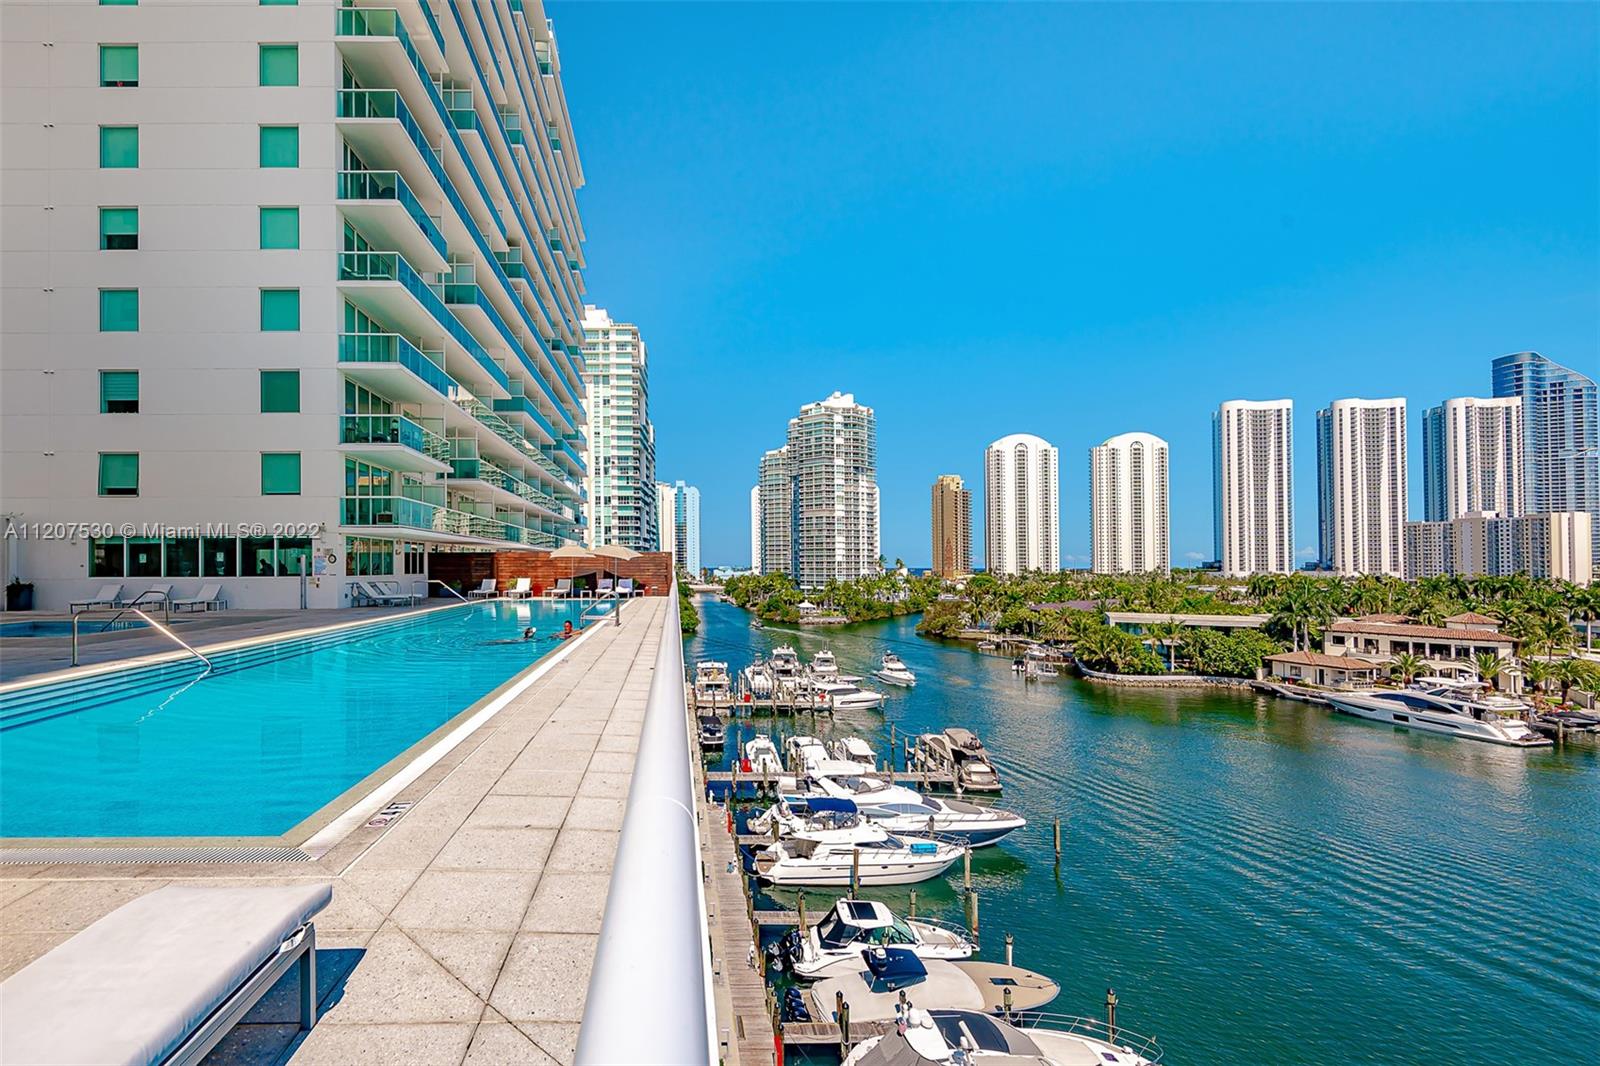 Enter into this amazing unit overlooking the waters of the intracoastal, with 2 beds/2 baths, updated and modern kitchen. The 400 Sunny Isles Condo has 2 attended pool areas, beach access, his and hers gym, sauna , bar area serving snacks and drinks.